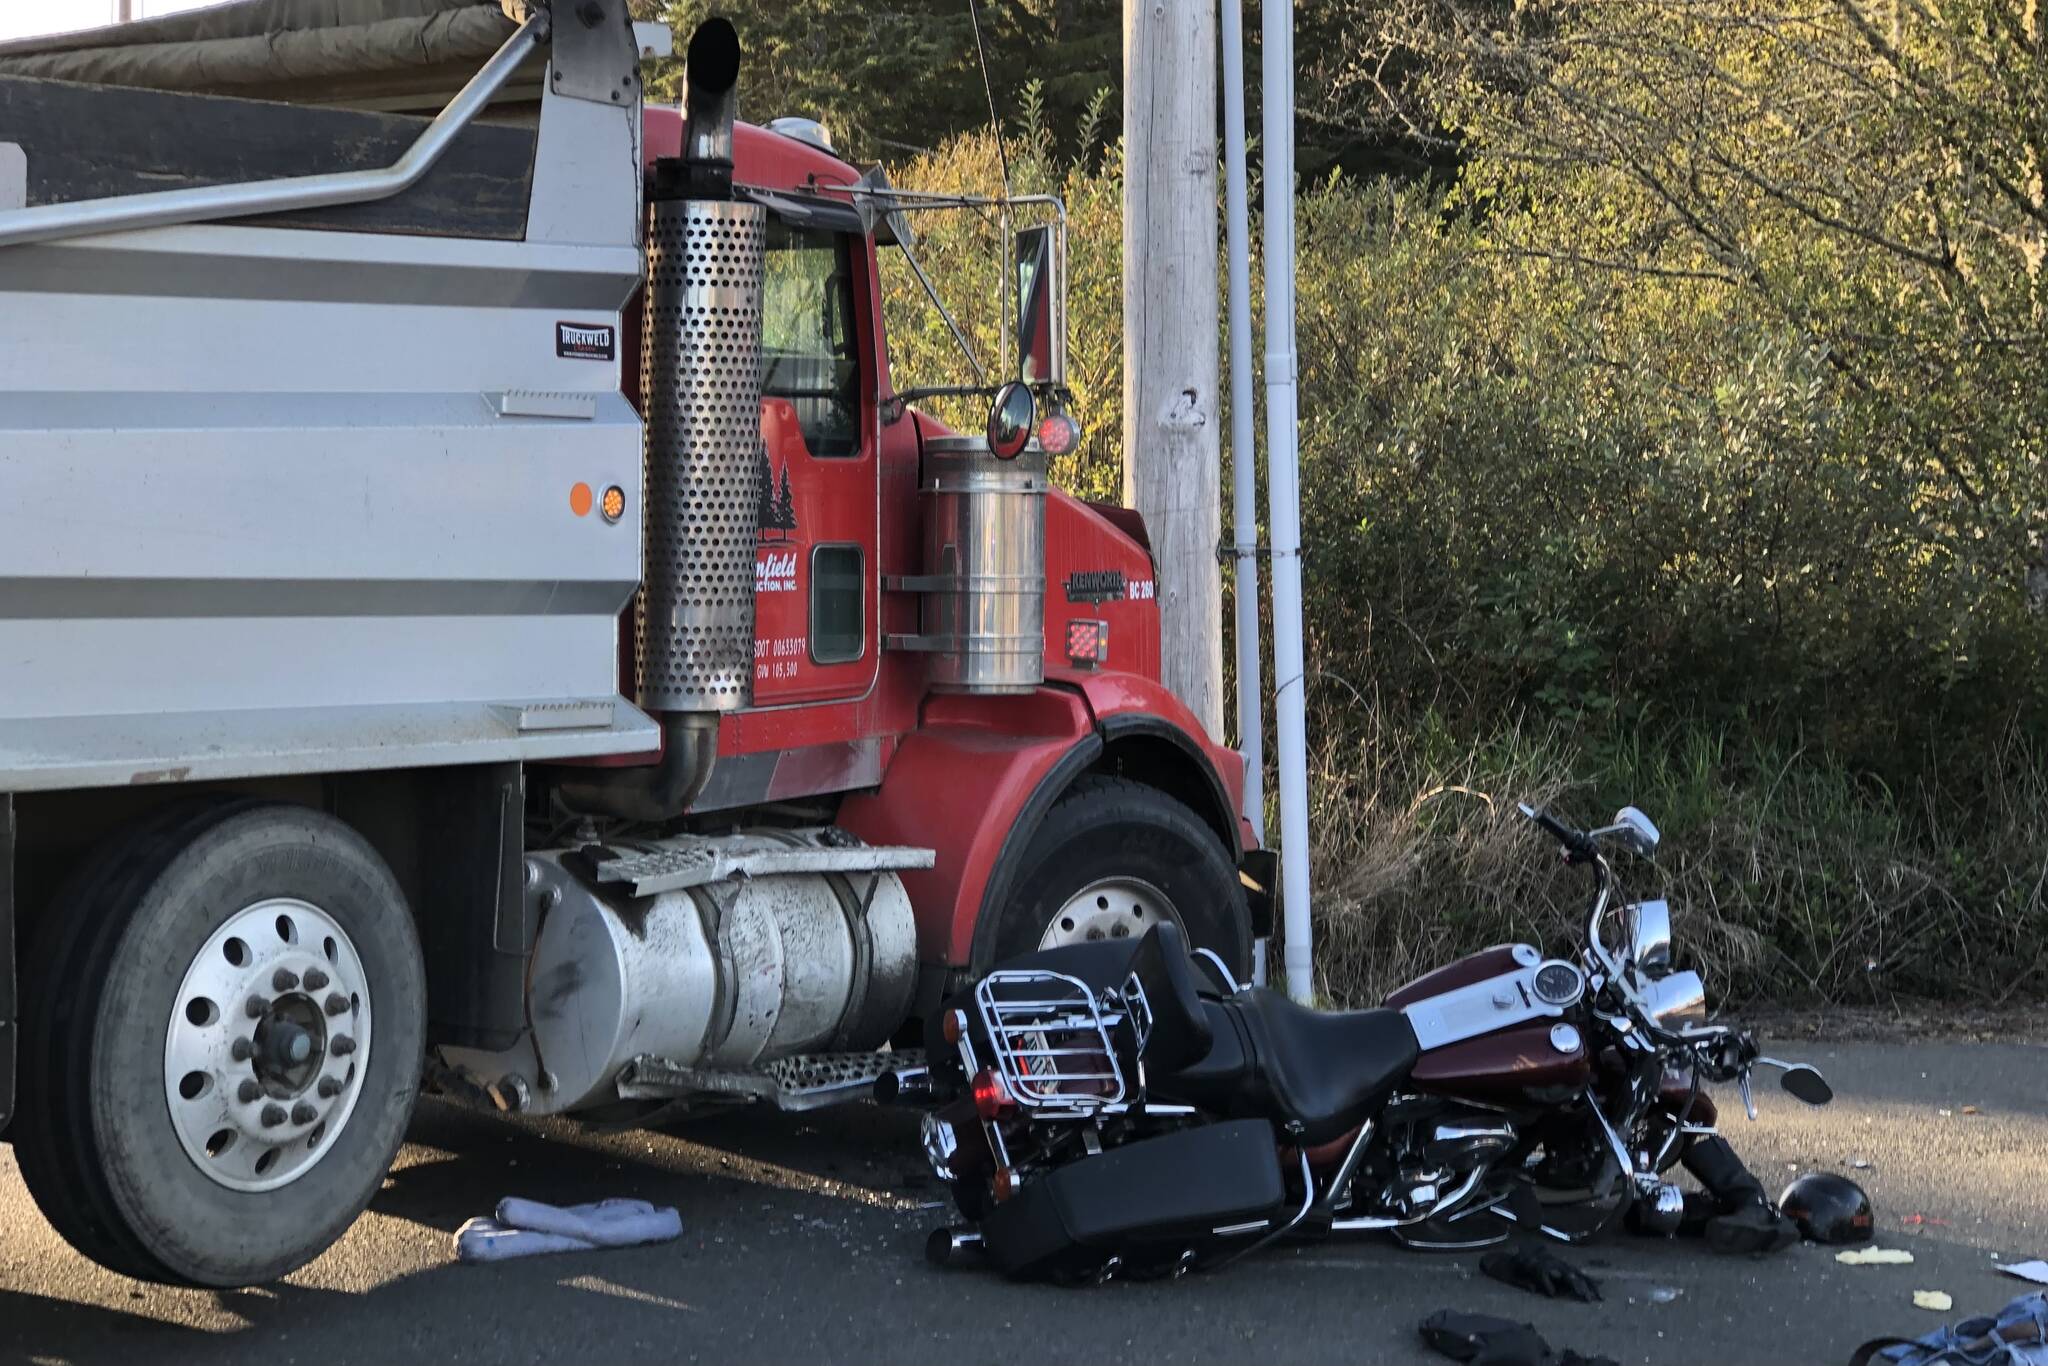 A 76-year-old Aberdeen man operating a motorcycle was killed in a motor vehicle crash near Westport on Oct. 12. (Michael Wagar / The Daily World)